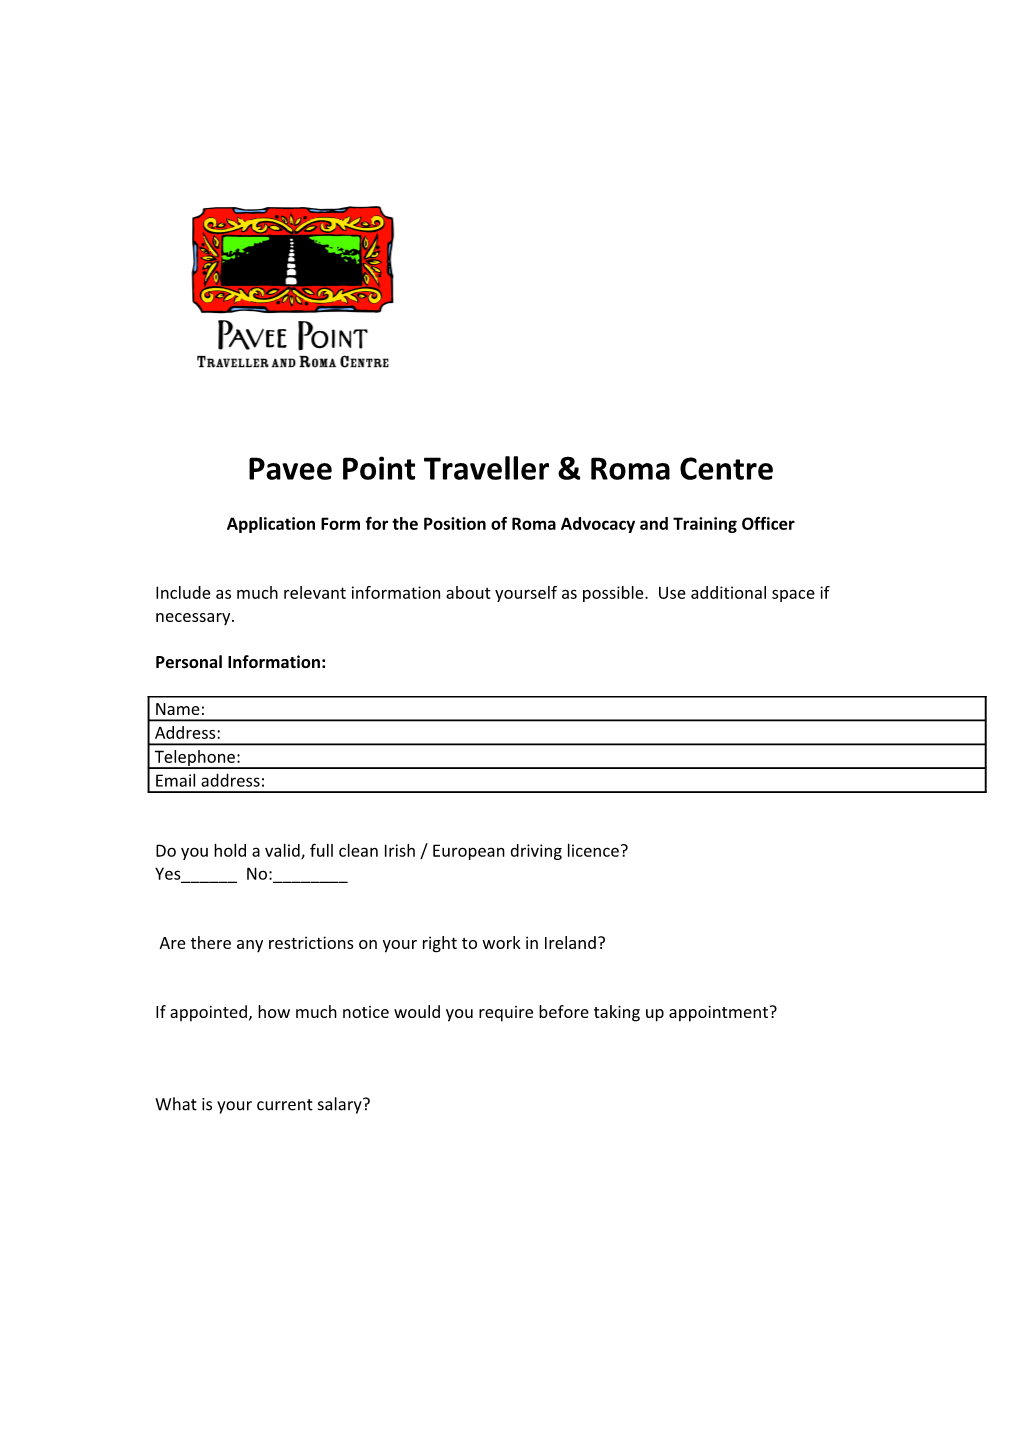 Pavee Point Travellers Centre